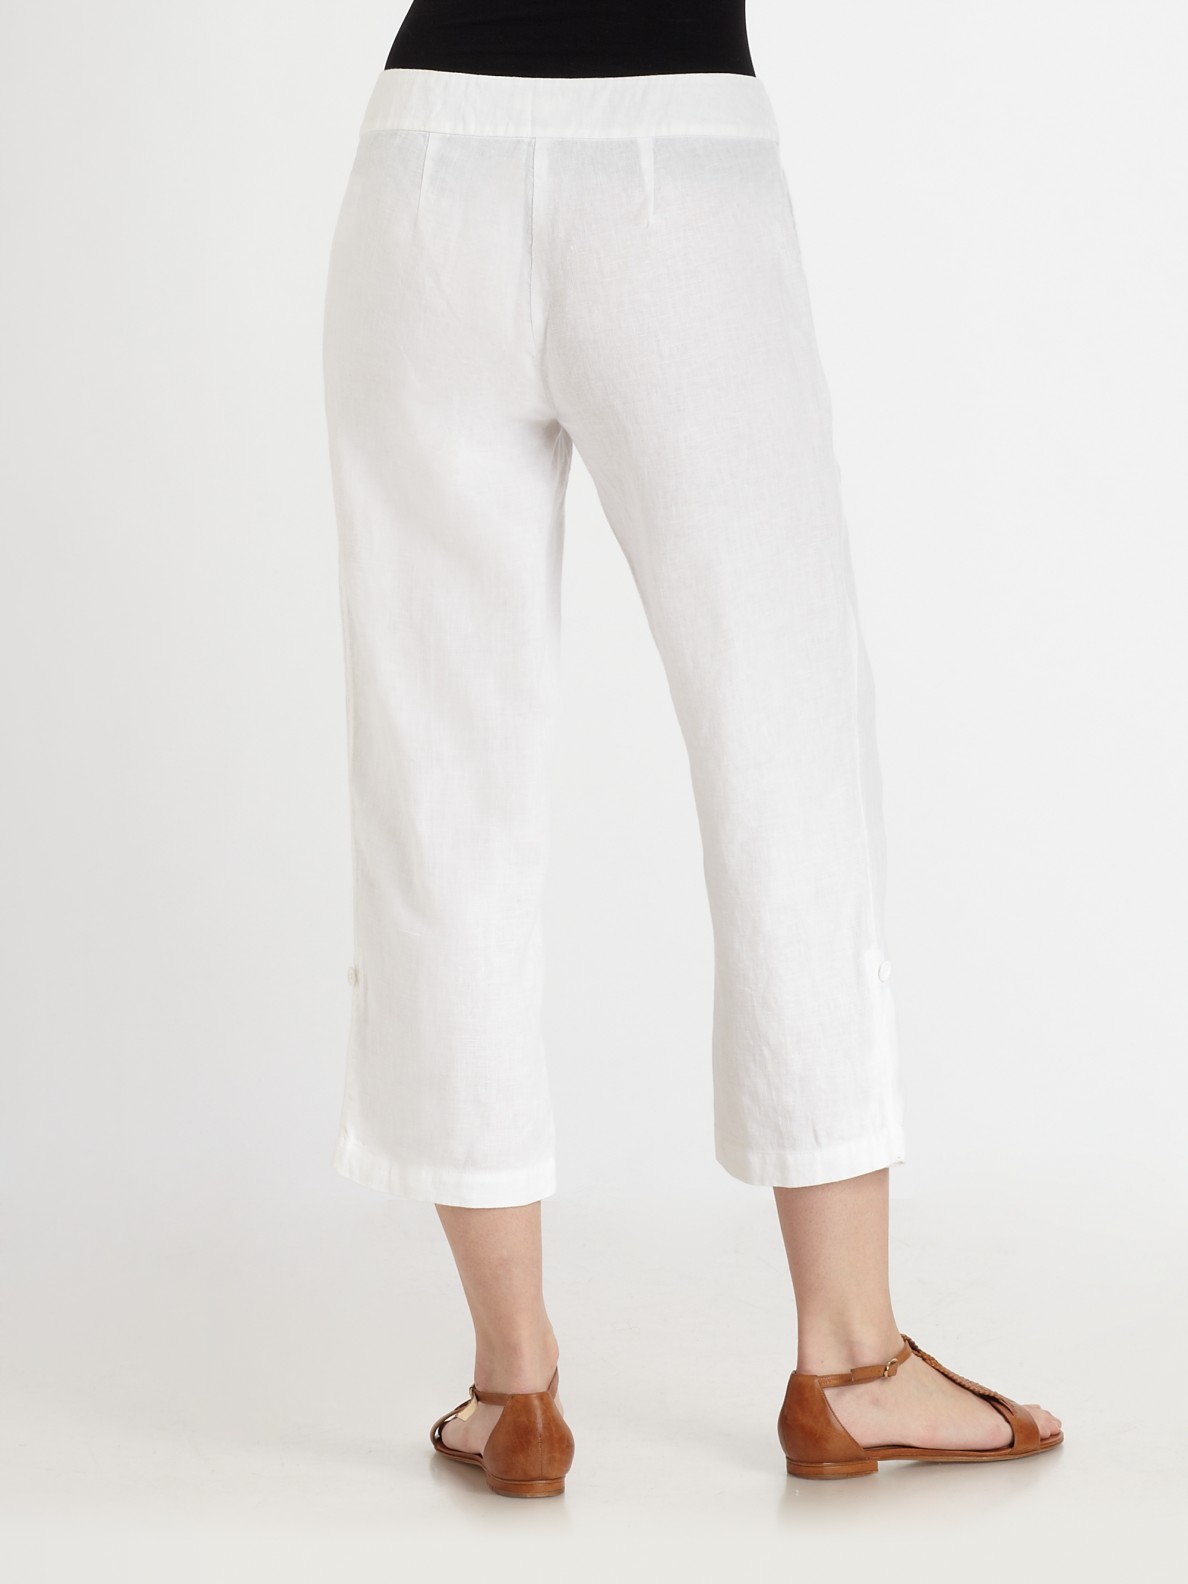 Eileen fisher Cropped Linen Pants in White | Lyst